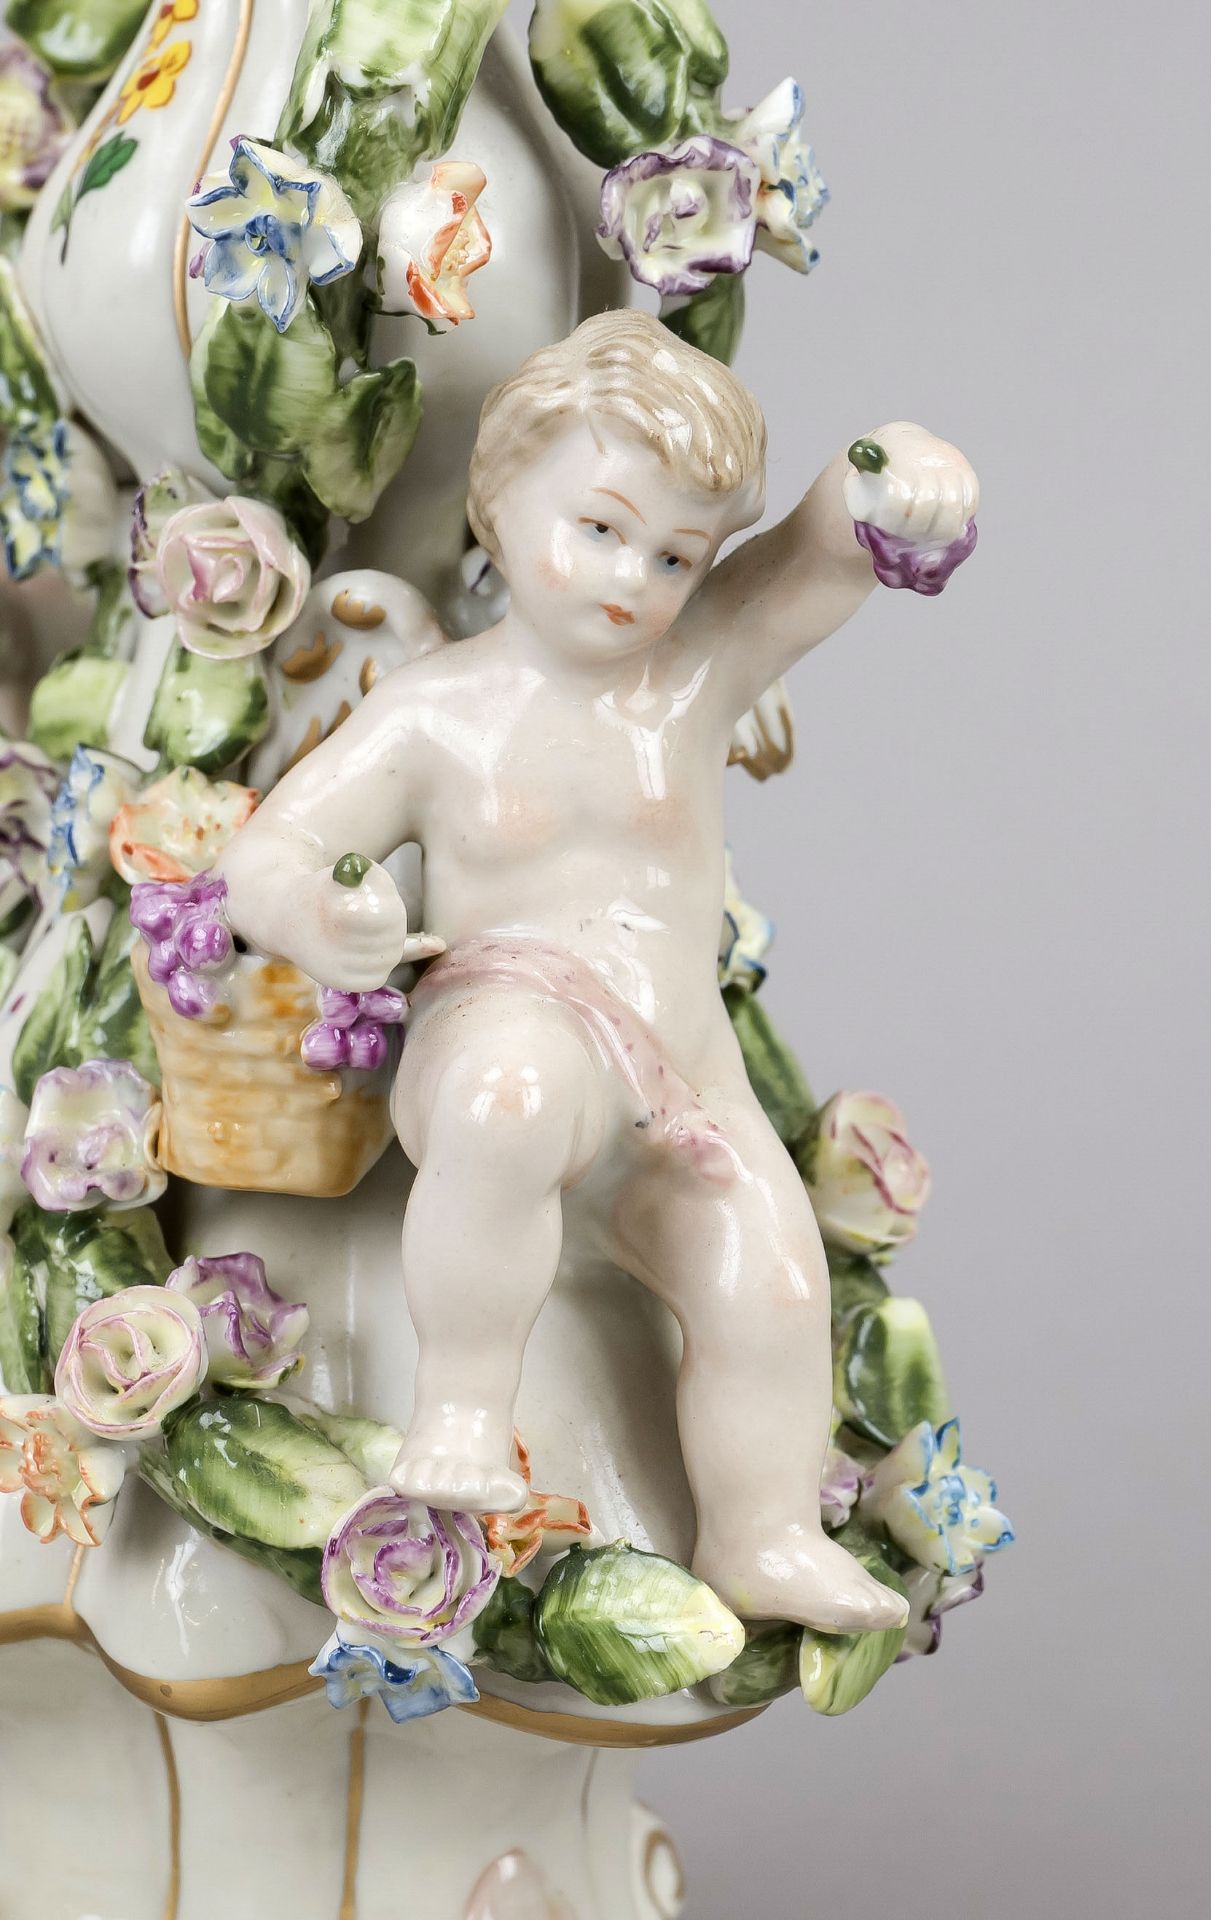 Vase, 20th century, Meissen imitation mark, baluster shape with 2 putti sitting on the sides between - Image 3 of 3